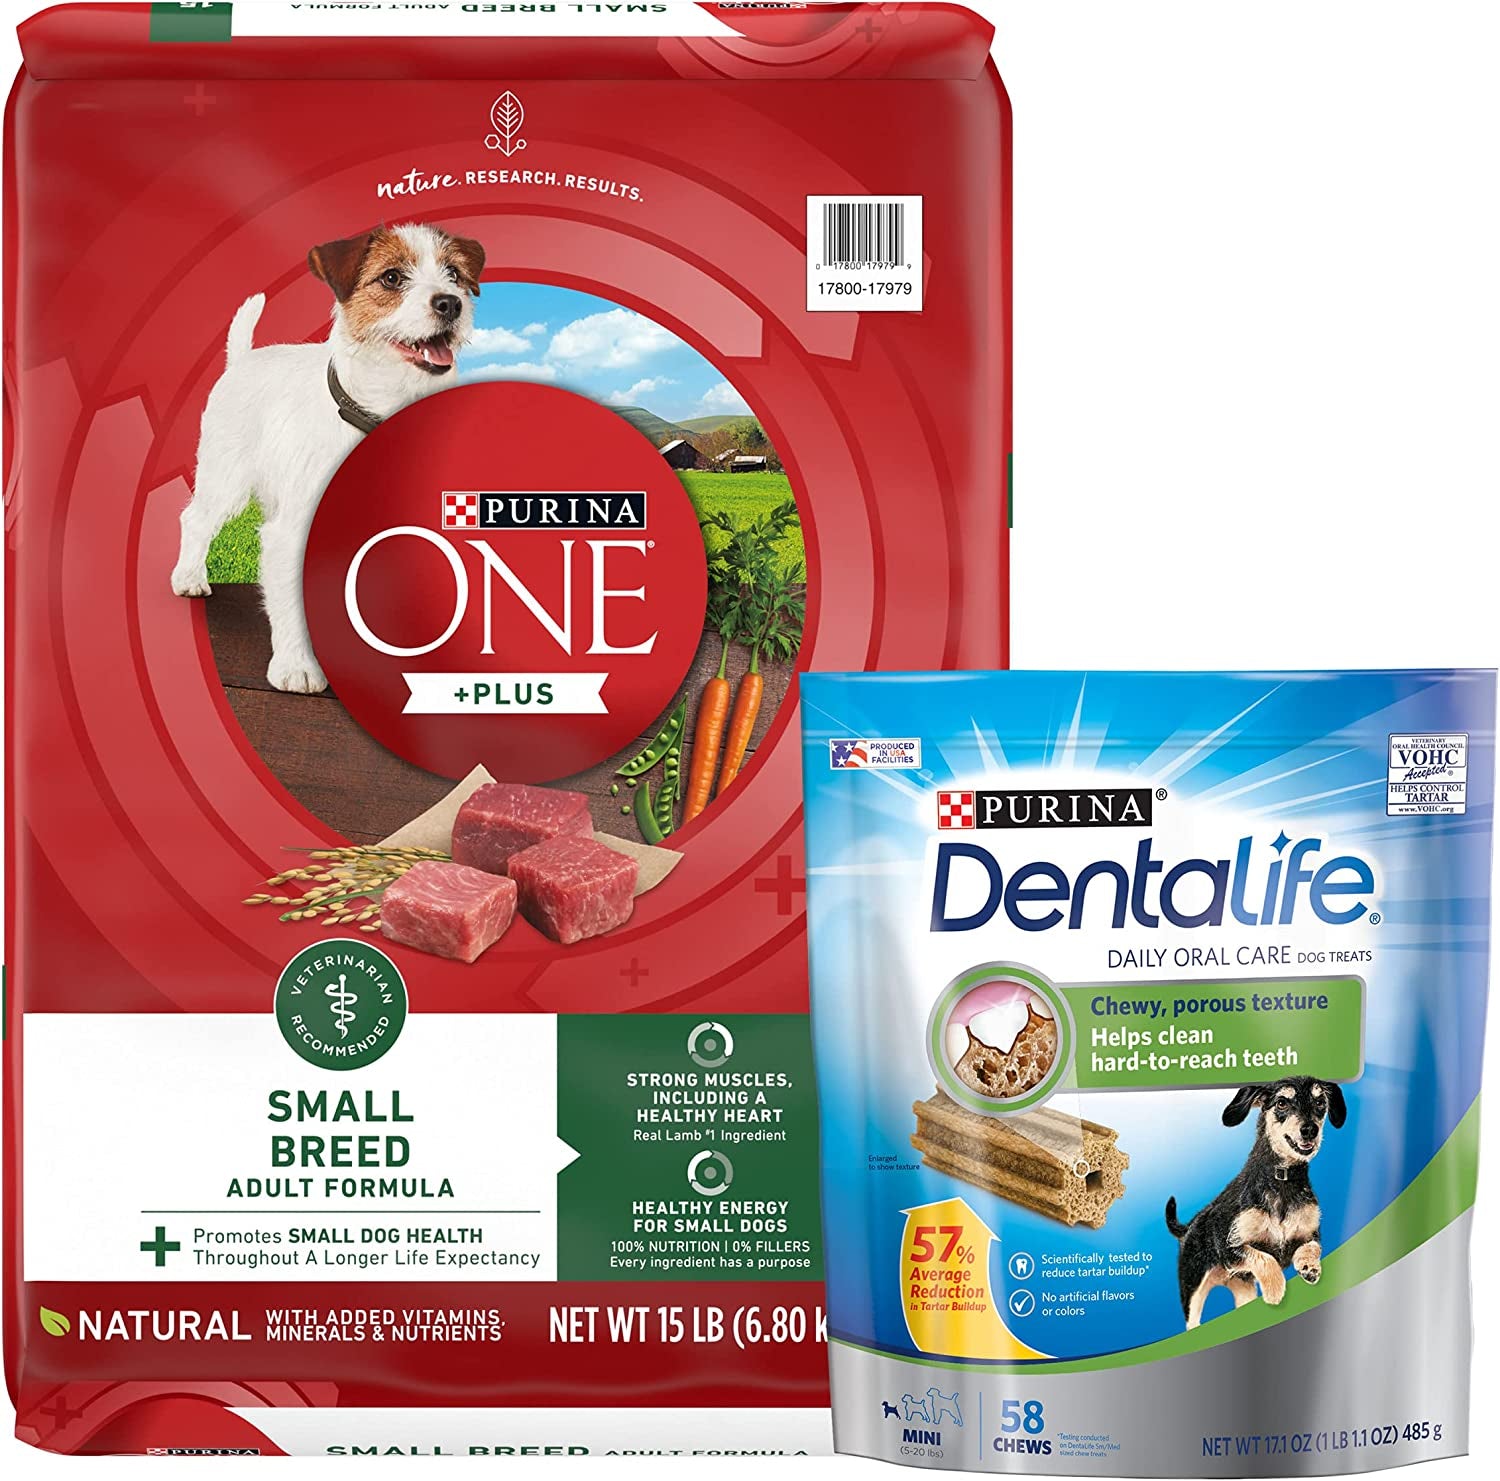 Purina Bundle Pack Small Breed Dog Food and Treats